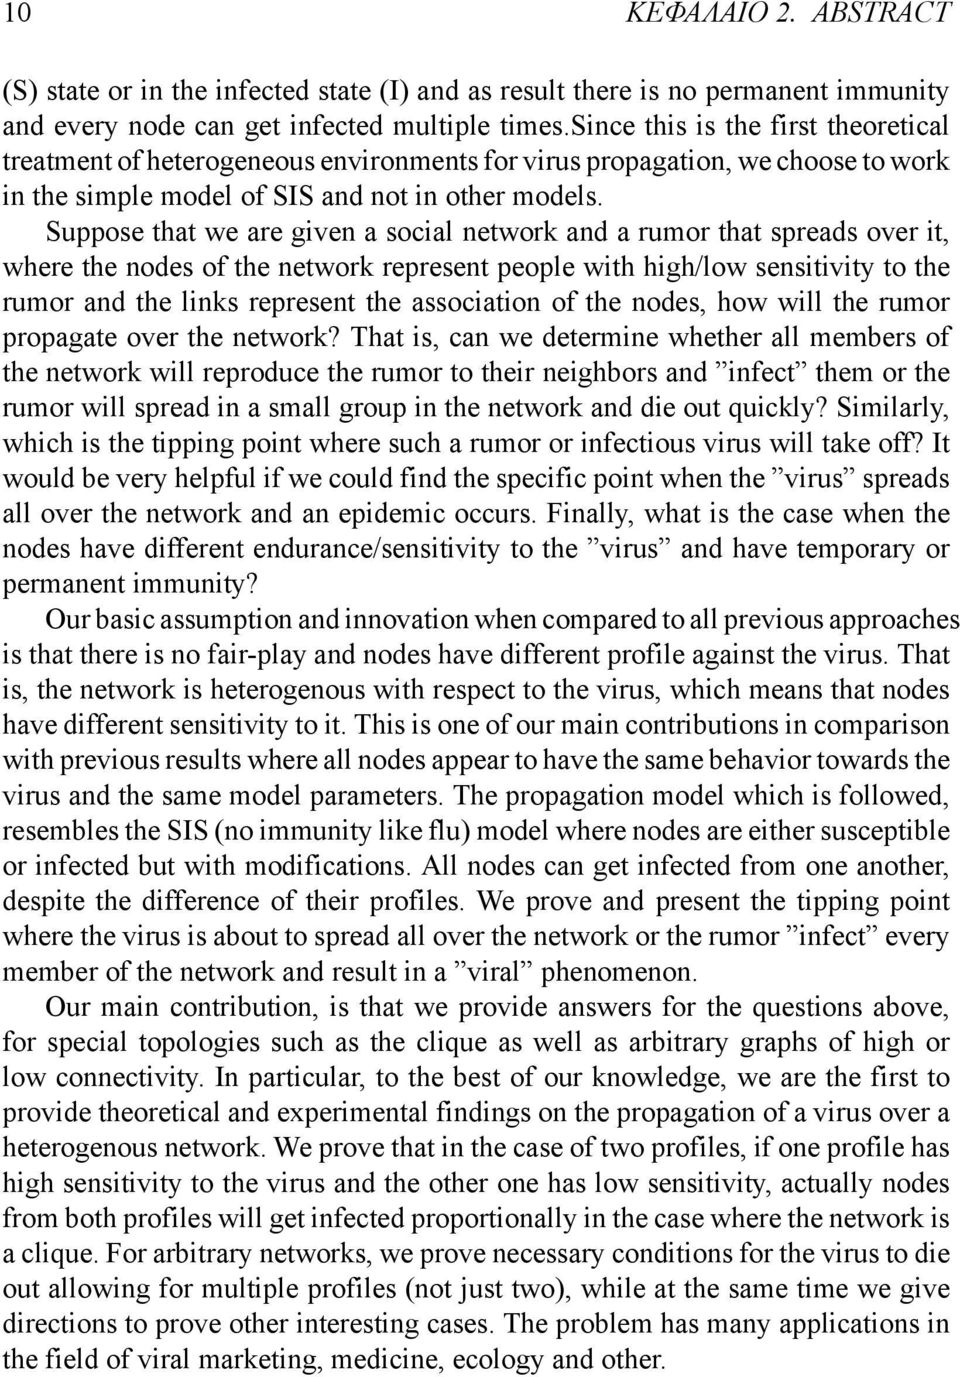 Suppose that we are given a social network and a rumor that spreads over it, where the nodes of the network represent people with high/low sensitivity to the rumor and the links represent the